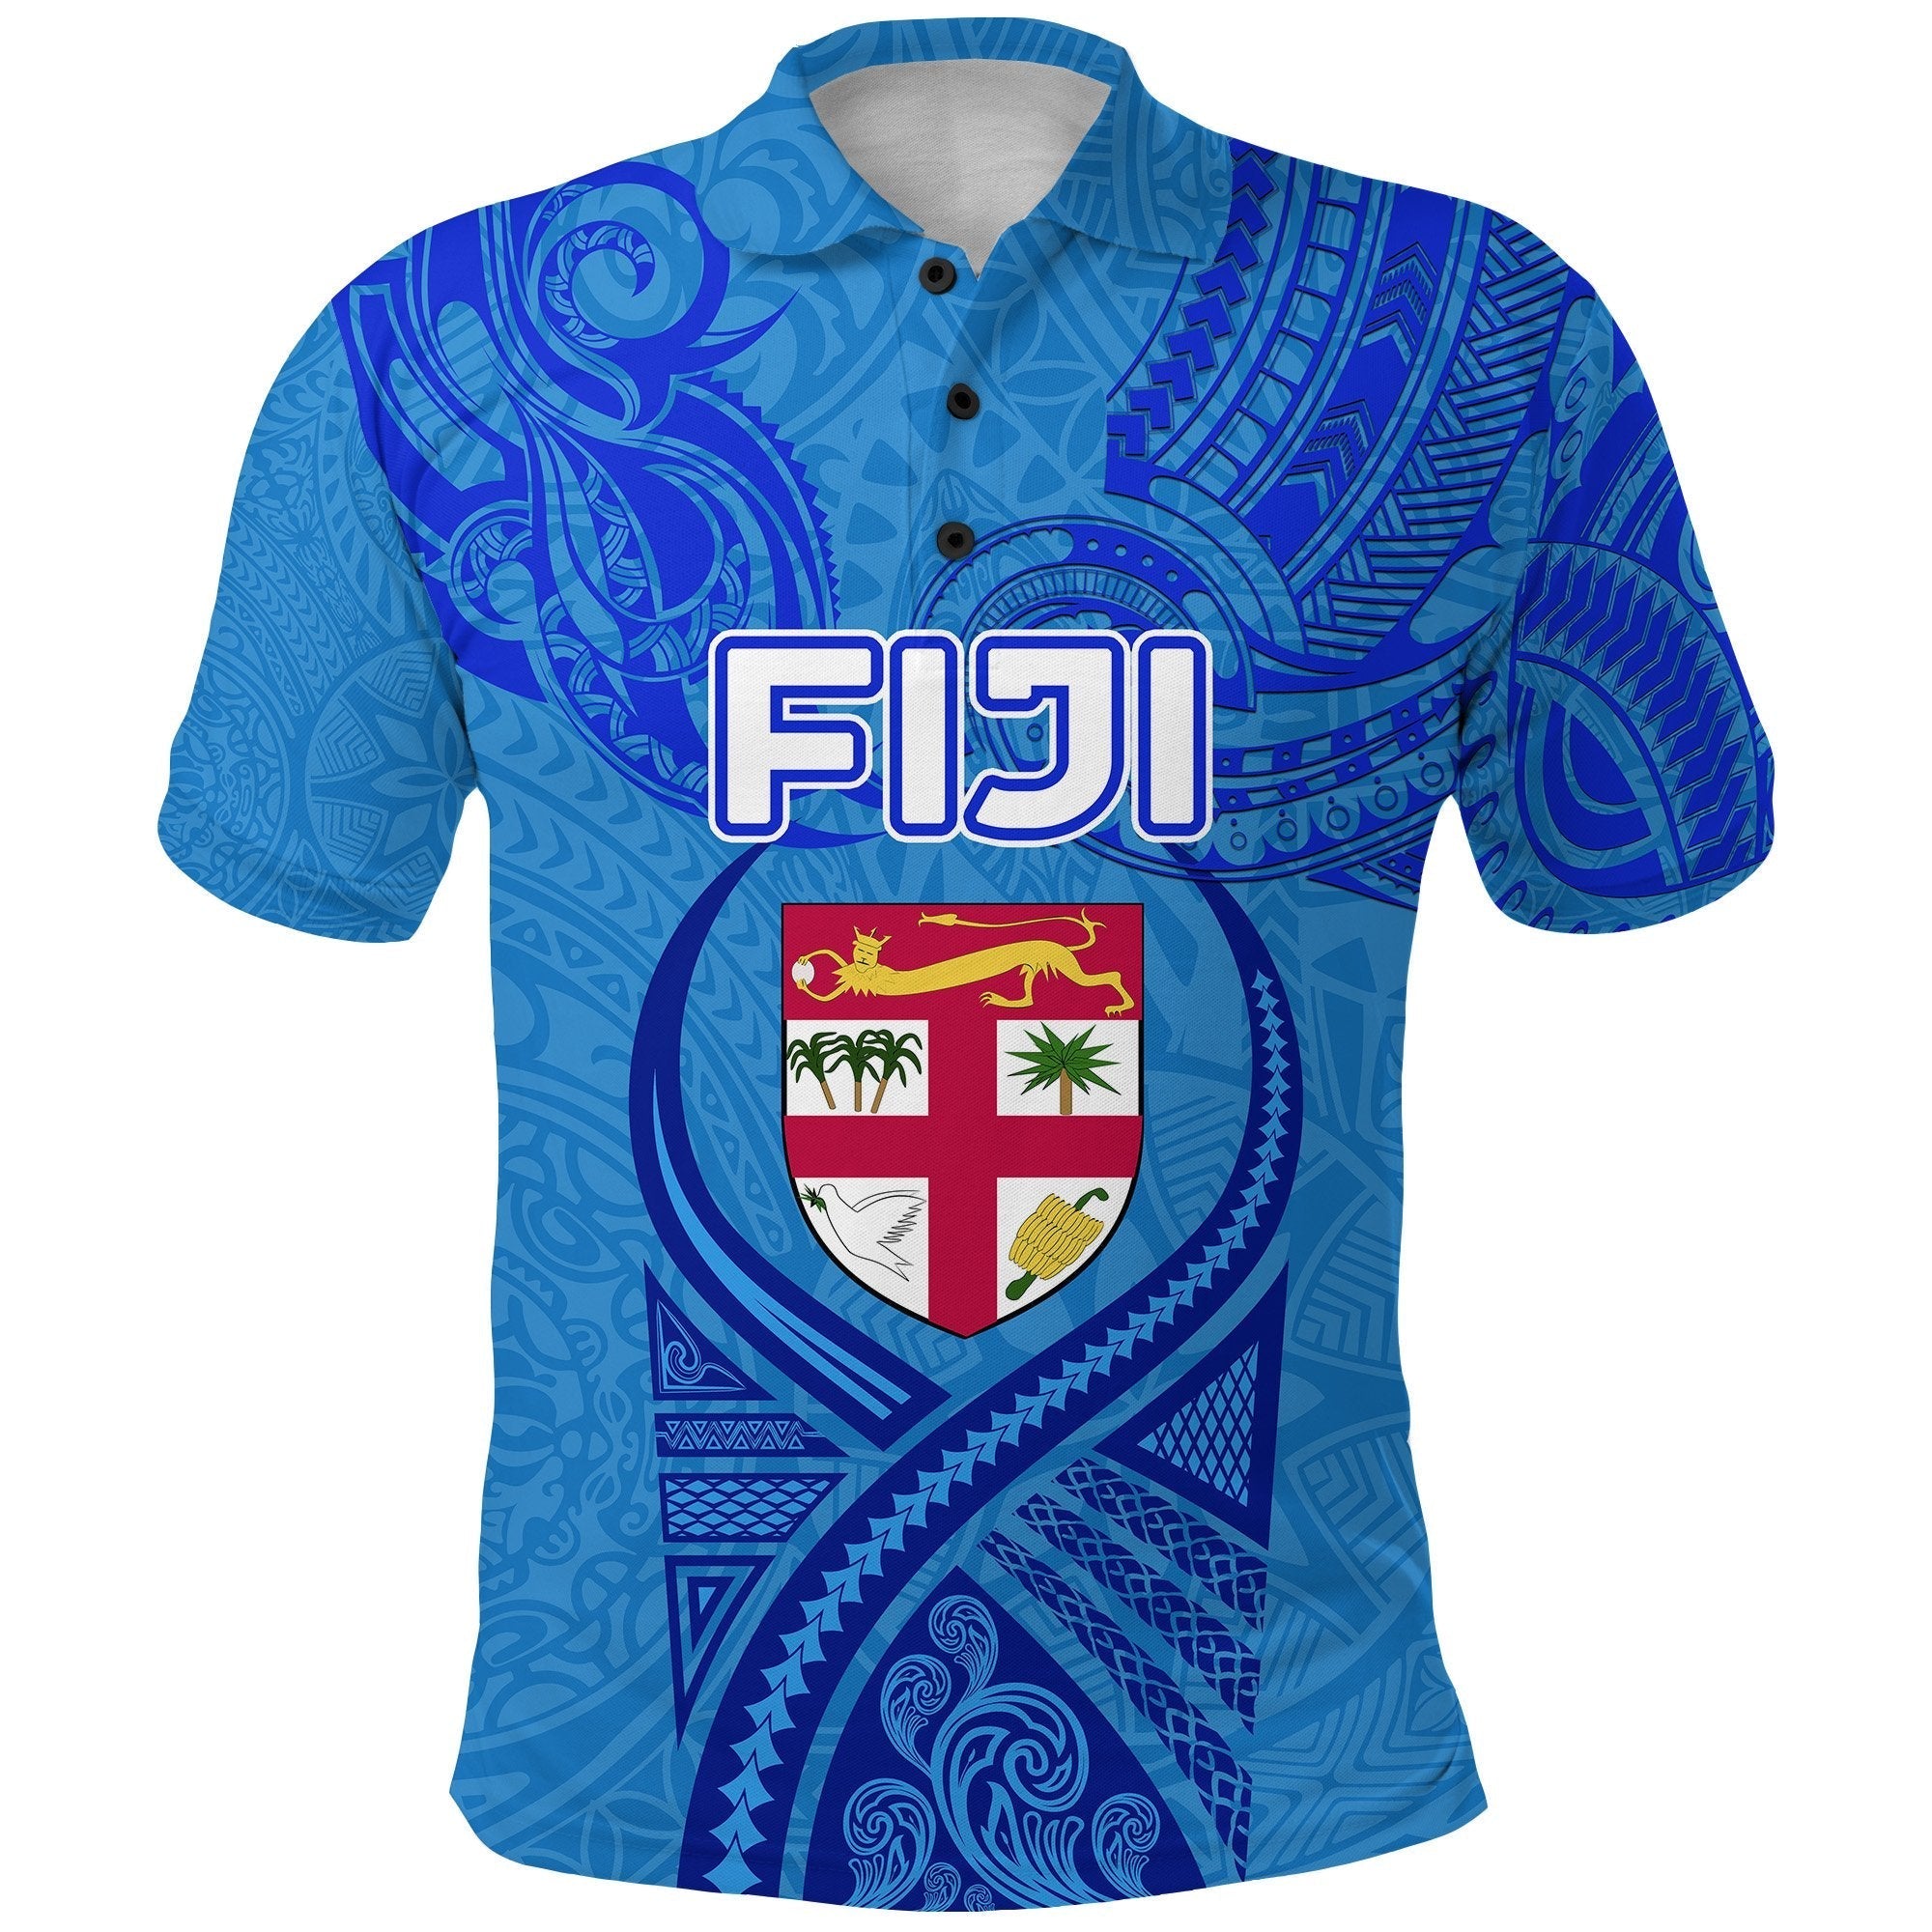 custom-personalised-blue-polo-shirt-fiji-rugby-polynesian-waves-style-custom-text-and-number